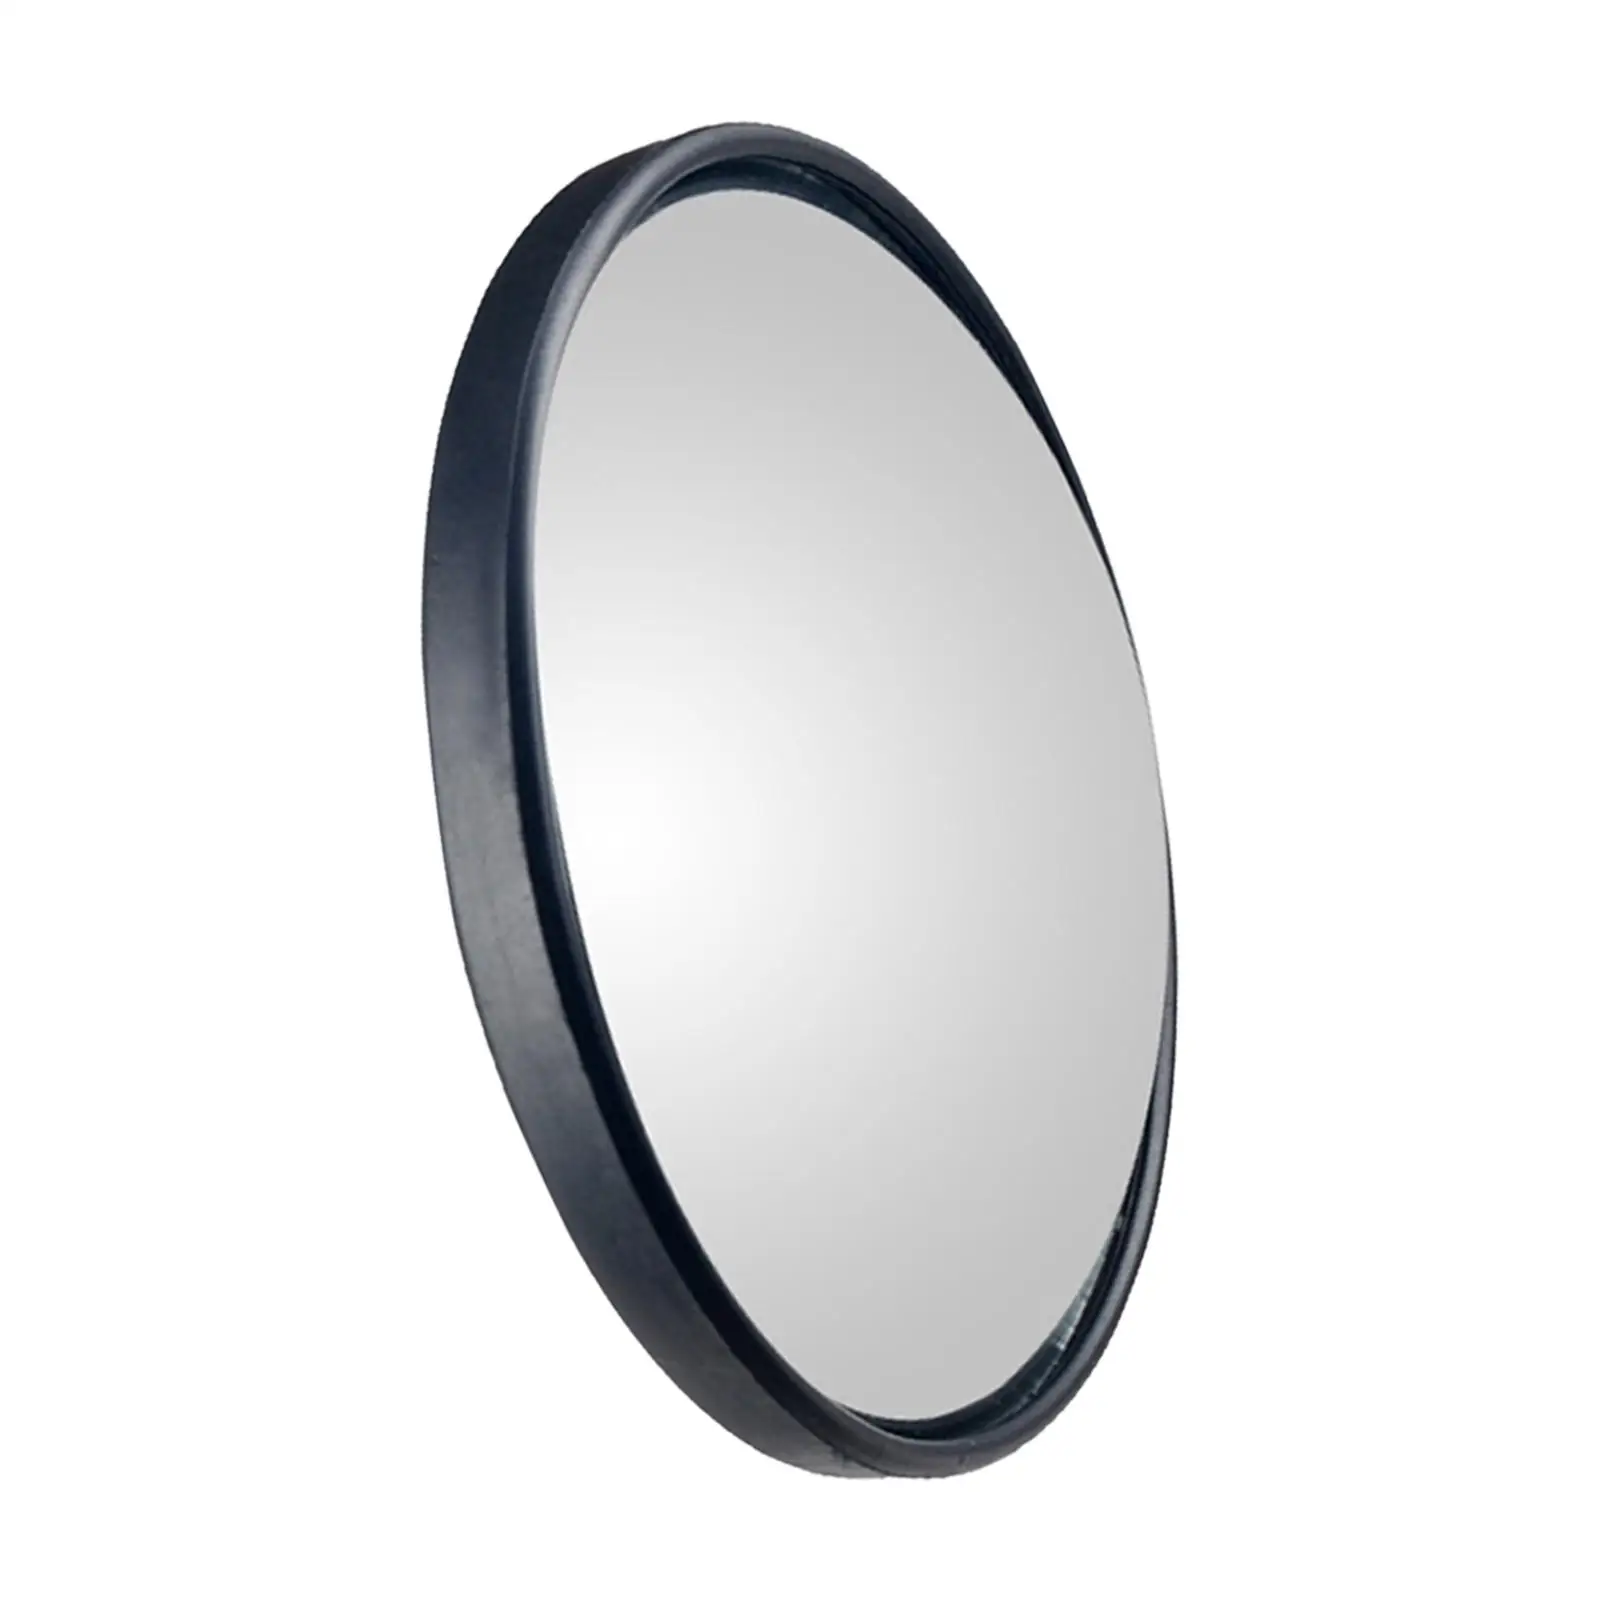 Adjustable Spot Mirrors/ Large View Field Rearview Round Side Convex Mirror/ Fit for Truck School Bus